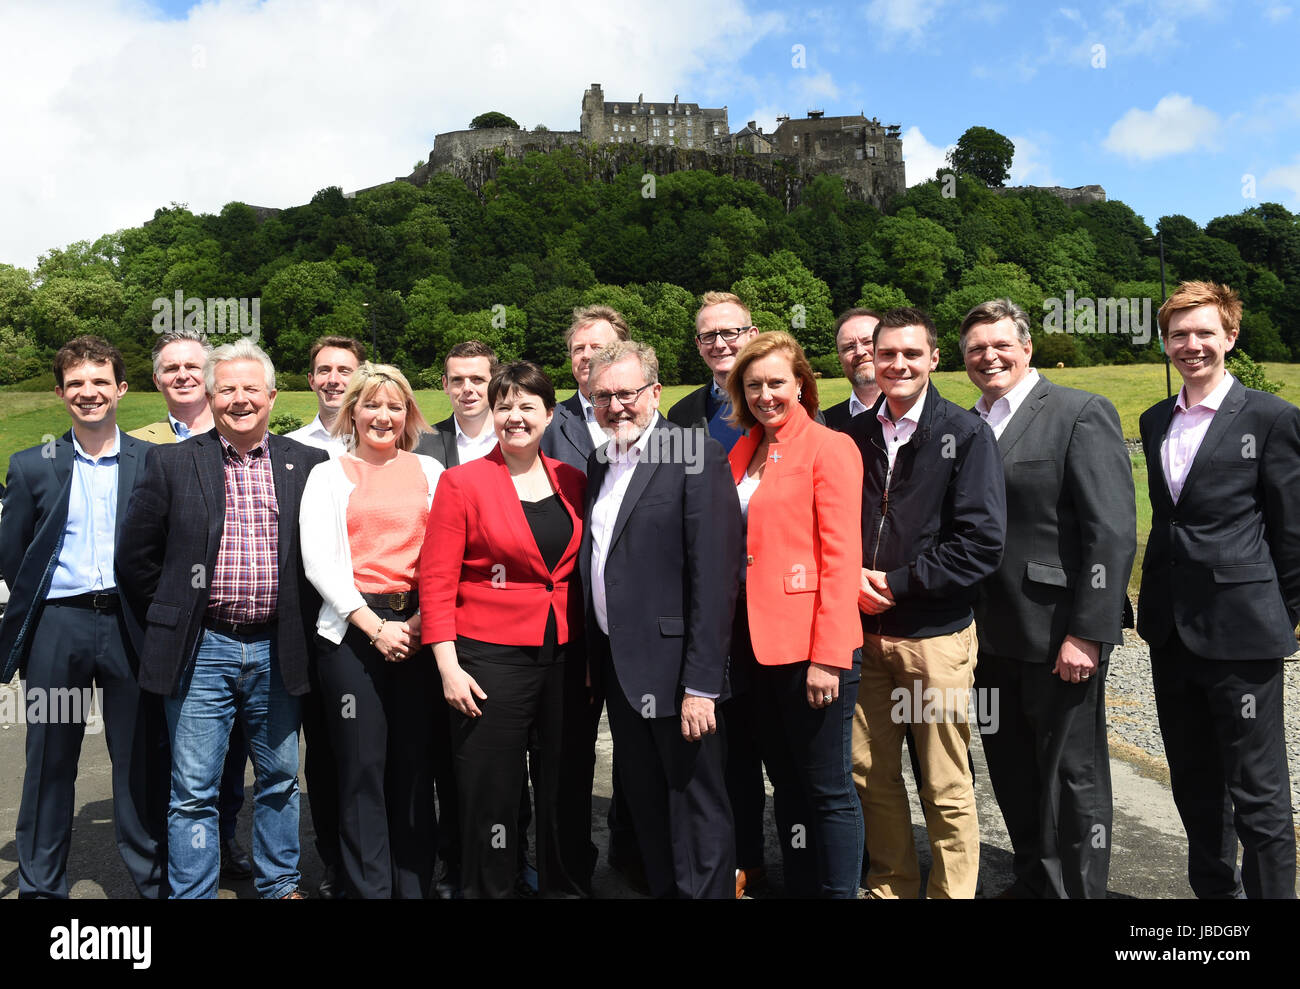 Scottish Conservative leader Ruth Davidson (red jacket) at a photo call with the party's newly-elected members of parliament in front of Stirling Castle. Left to right: Andrew Bowie MP, Colin Clark MP, Bill Grant MP, Luke Graham MP, Kirstene Hair MP, Douglas Ross MP, Ruth Davidson, Alister Jack MP, David Mundell MP, John Lamont MP, Rachael Hamilton MSP, David Duguid MP, Ross Thomson MP, Stephen Kerr MP, Paul Masterton MP. Stock Photo